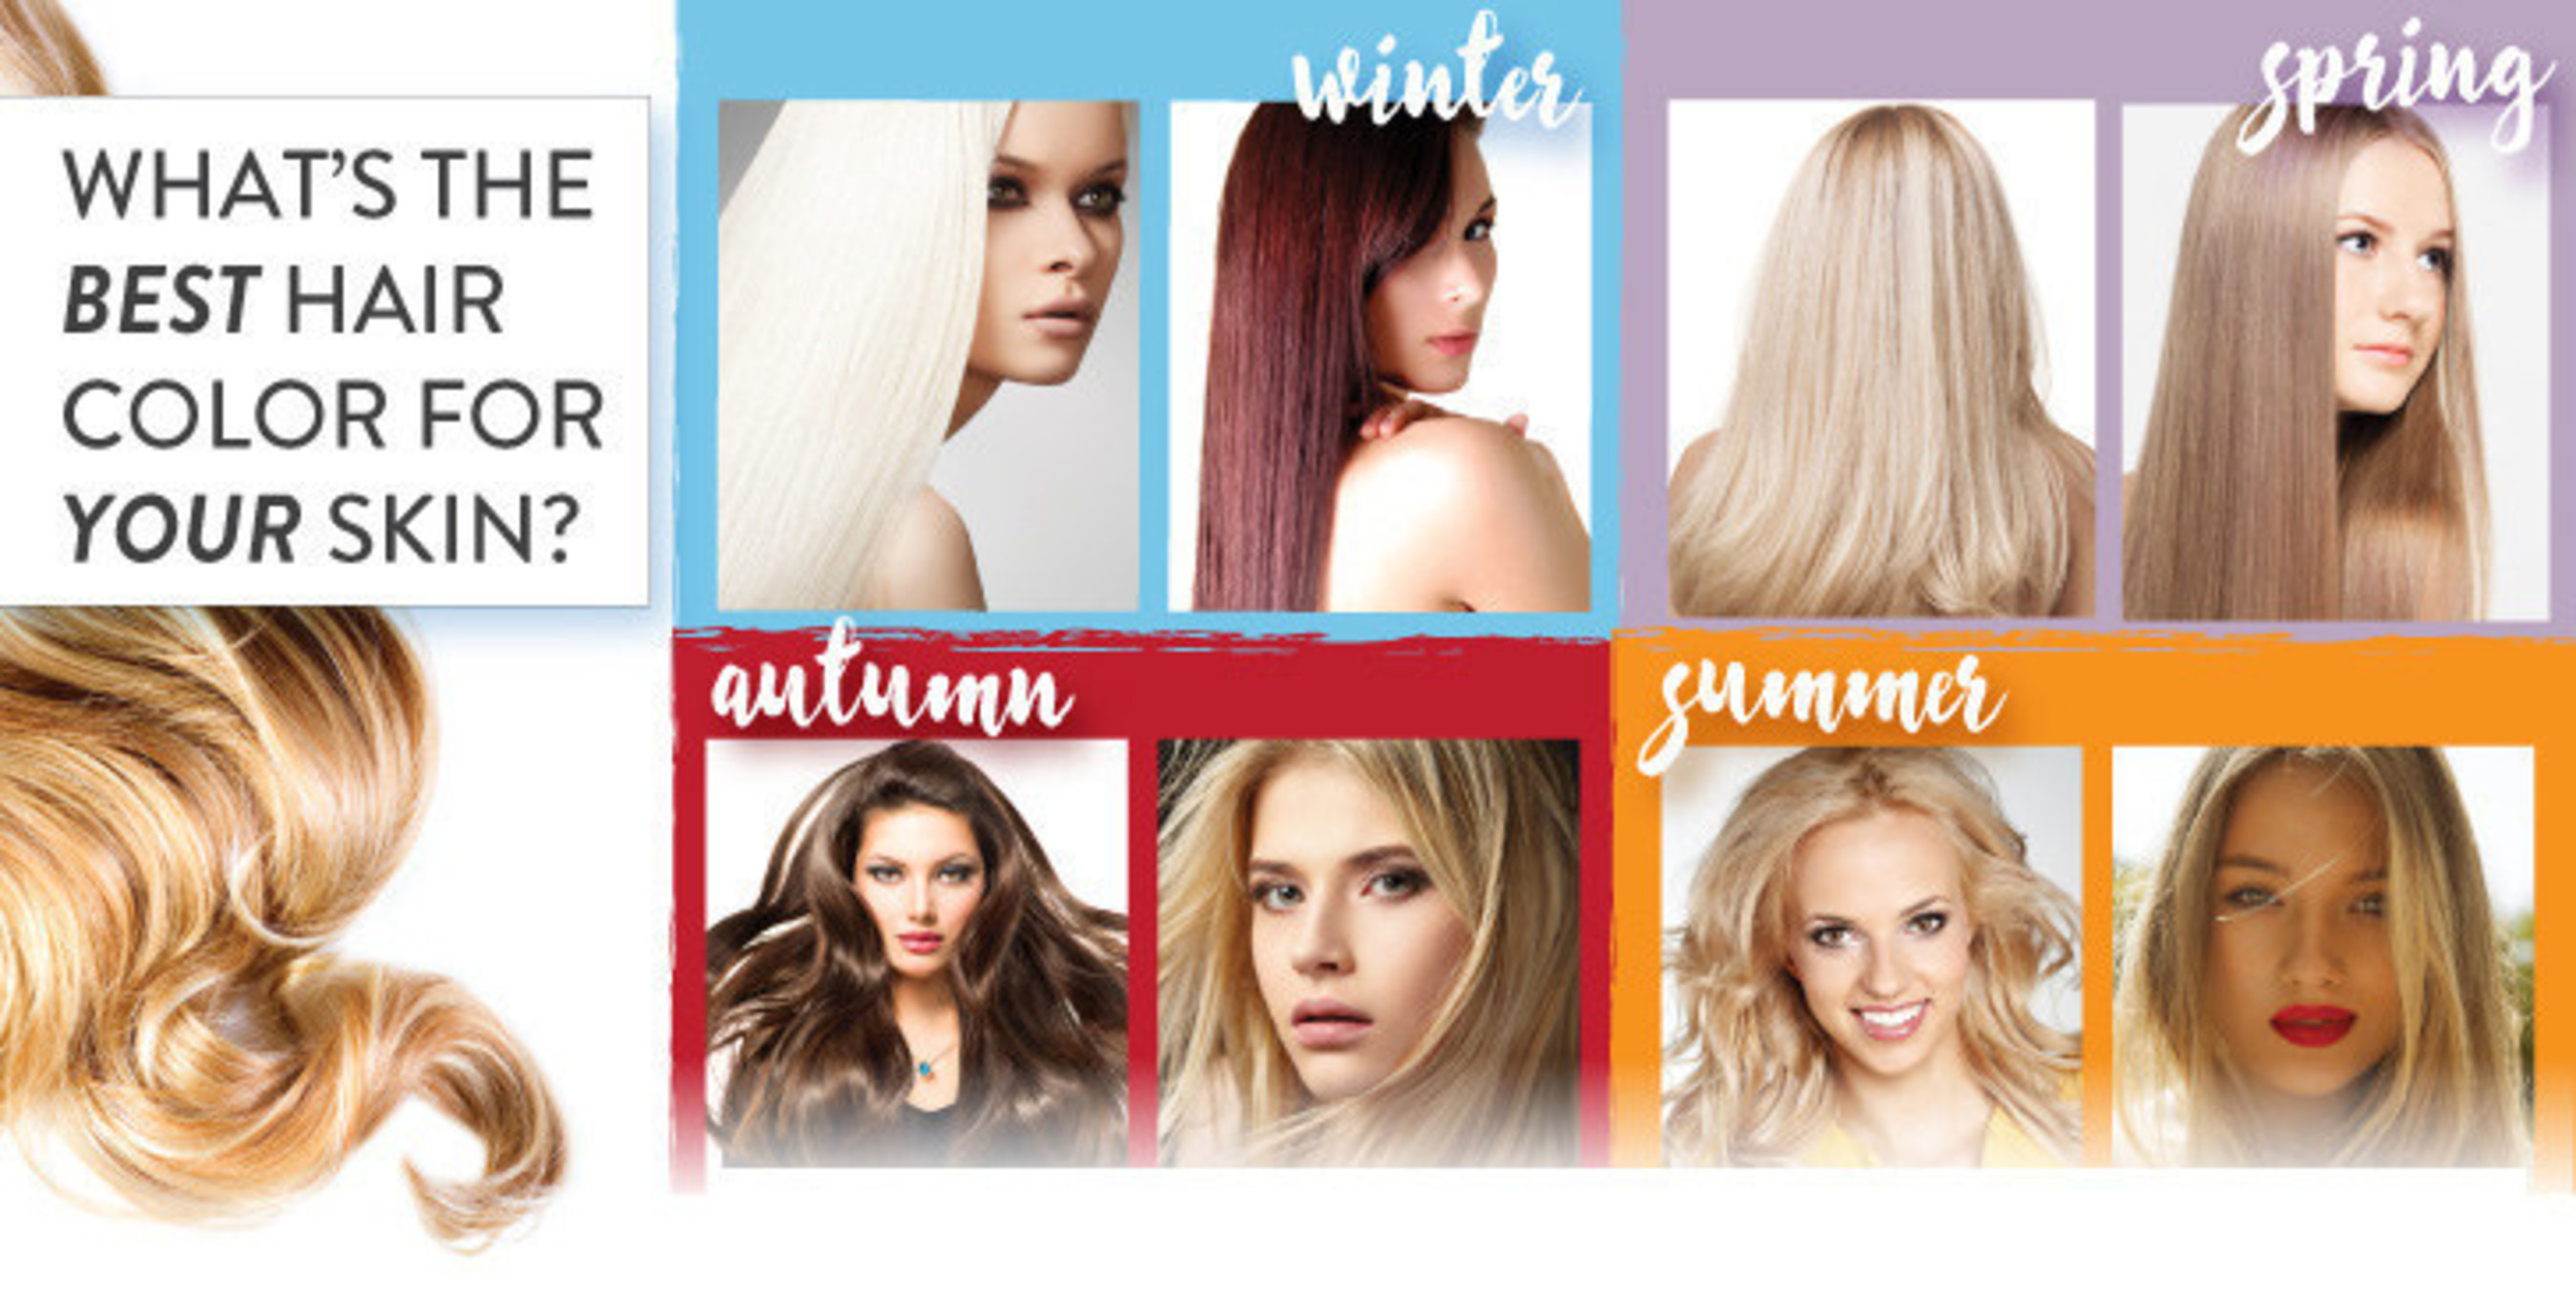 What's The Best Hair Color For Your Skin Tone? Vixen Daily Will Show You.